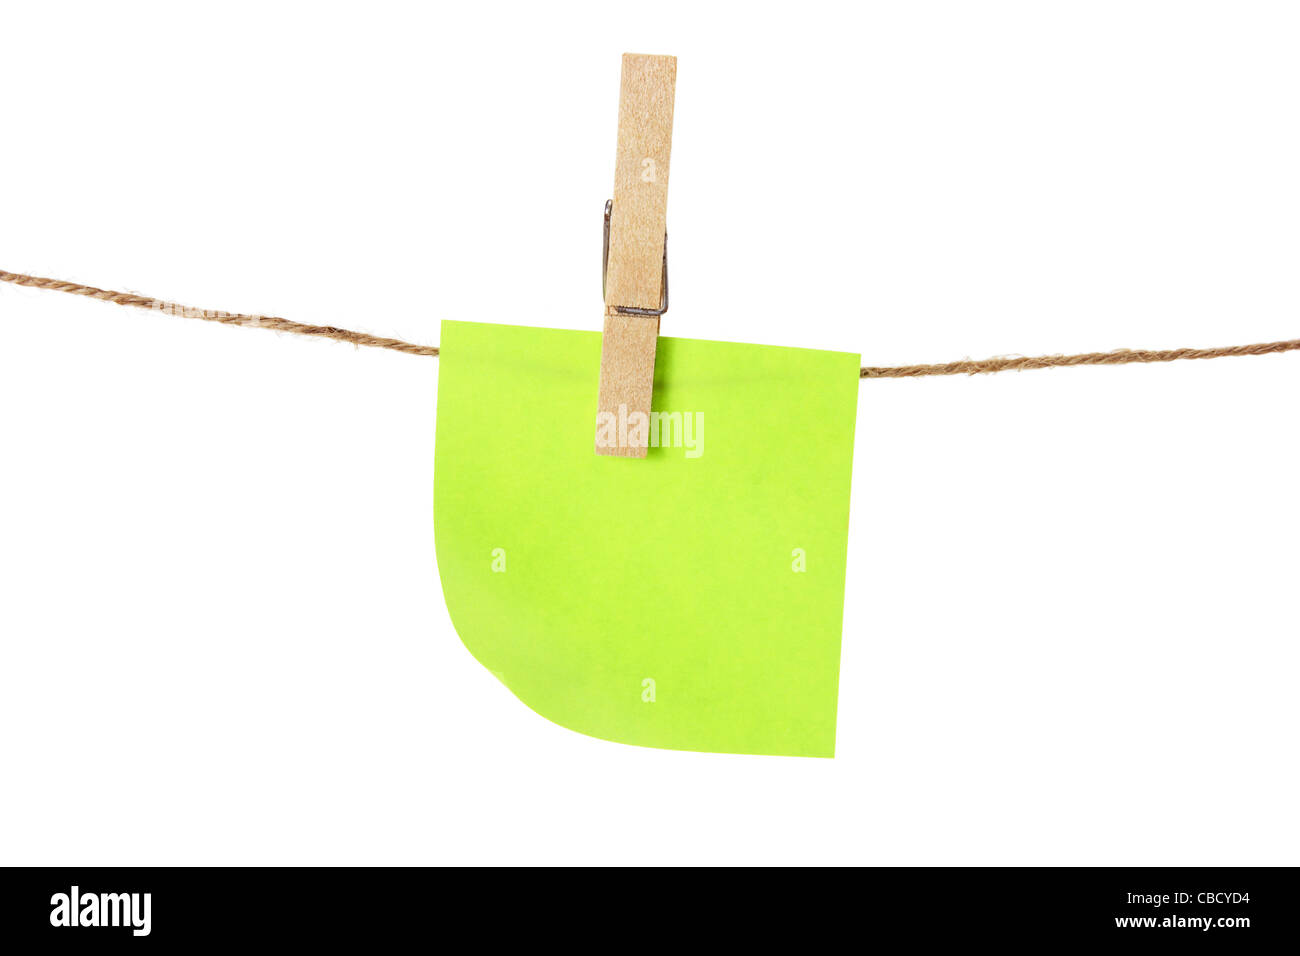 Adhesive Note Paper on Clothes Line Stock Photo